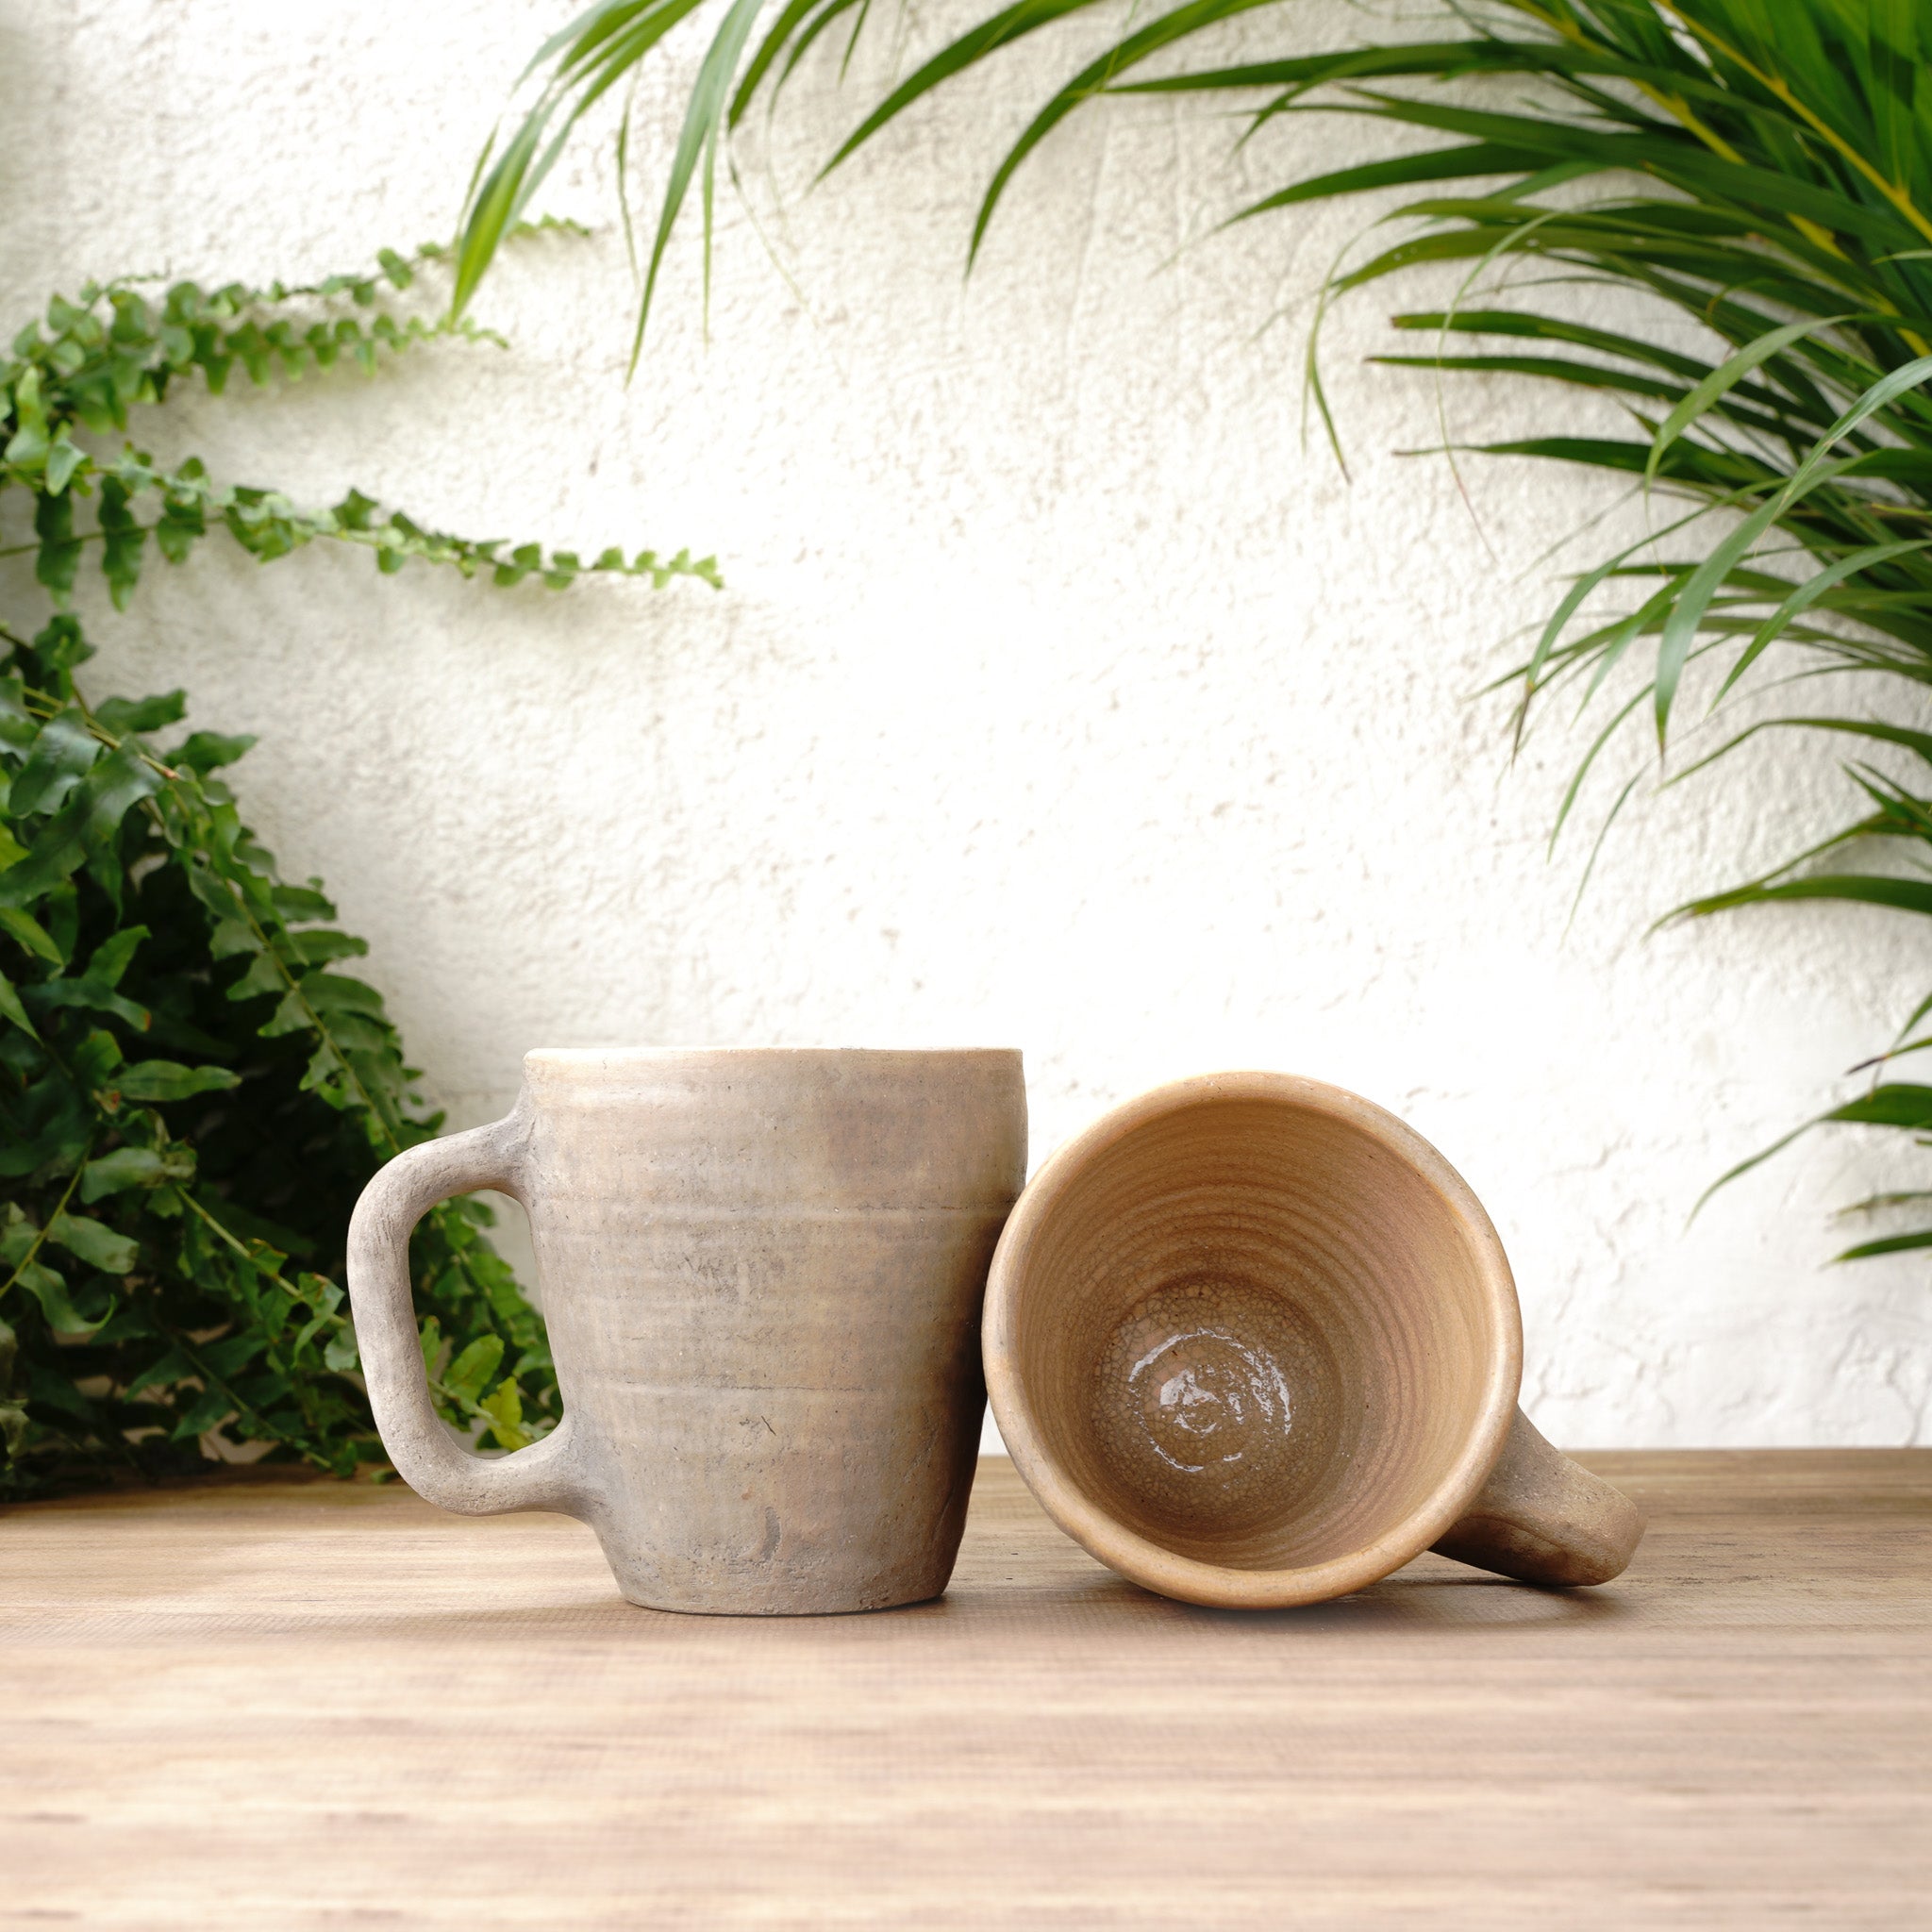 Beige Marble Ceramic Mug on a wooden table, highlighting its rustic charm.